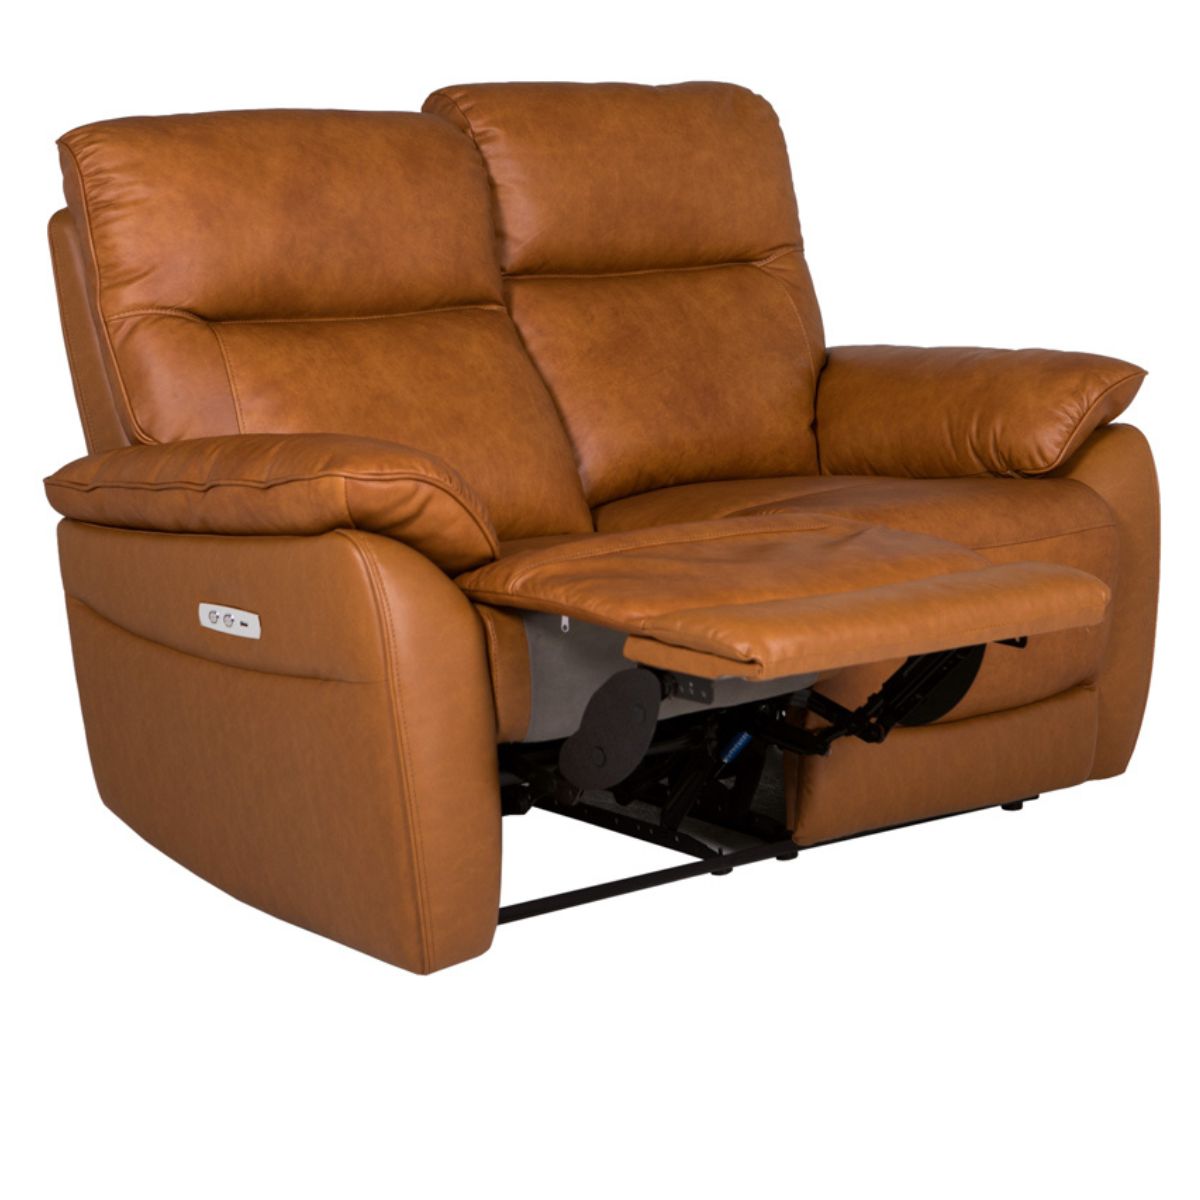 Newport Tan Leather 2 Seater Electric Recliner - 2